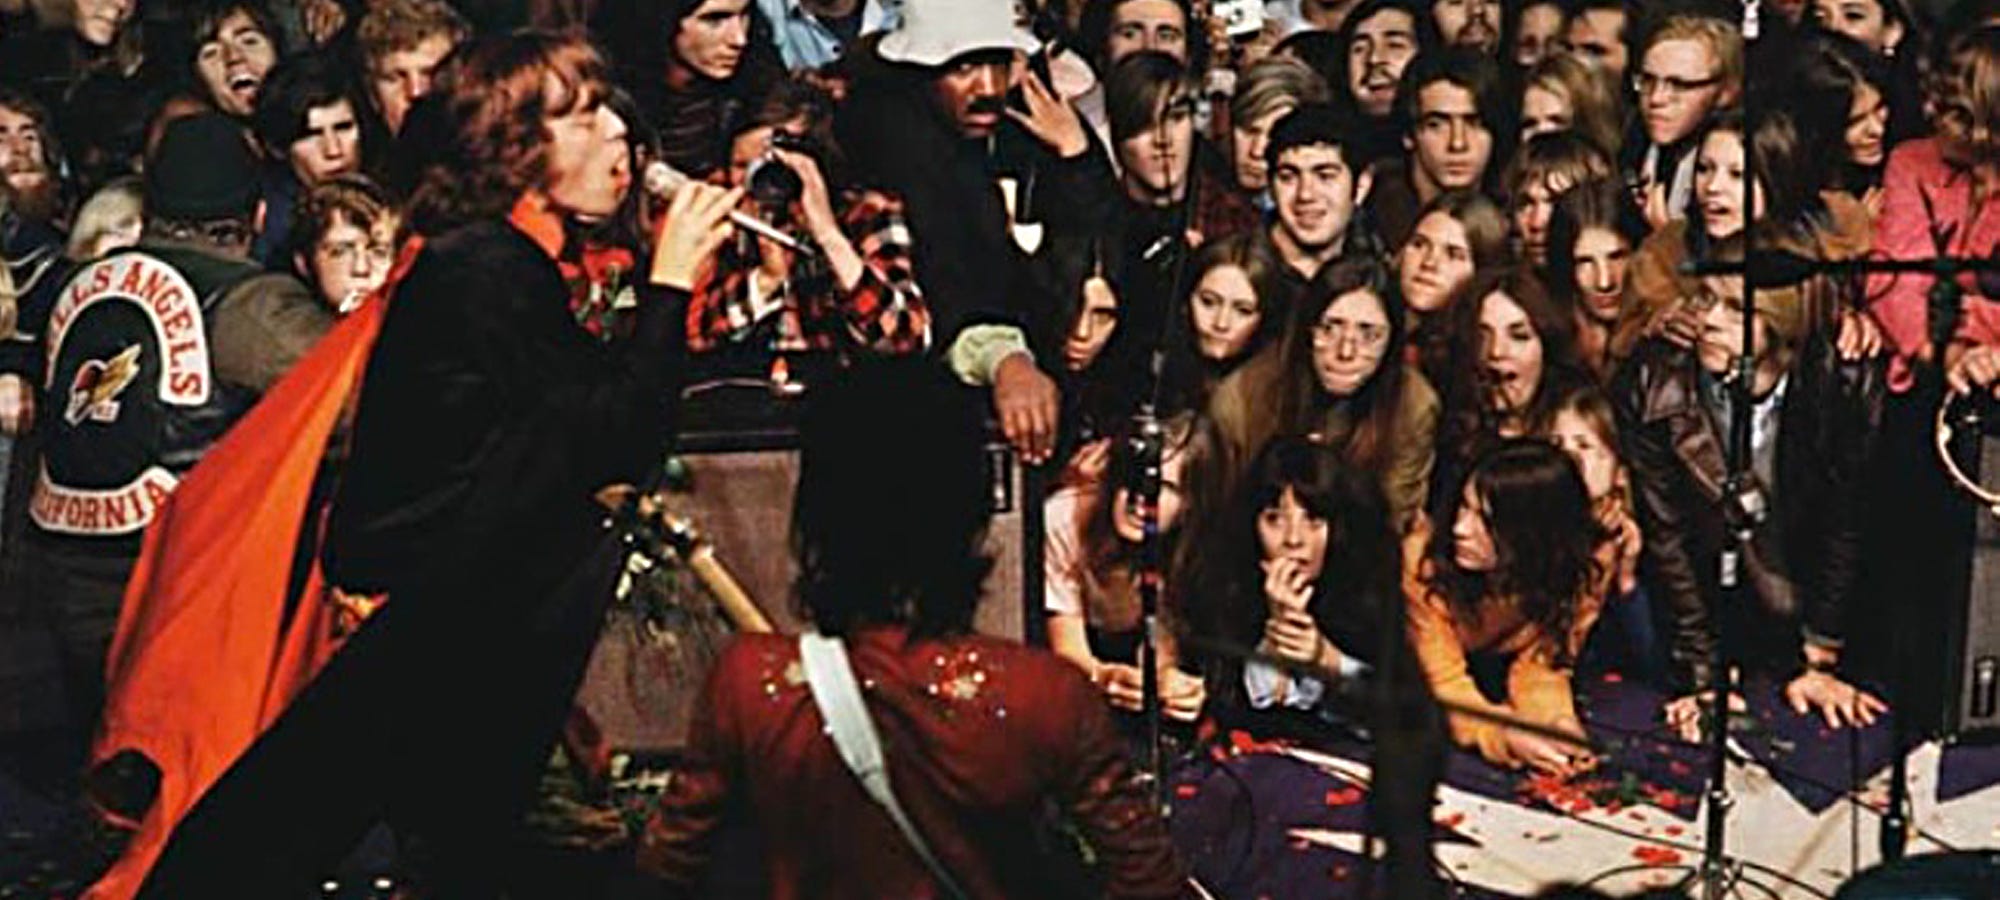 Mayhem and Murder at Altamont With the Rolling Stones | by Richard Brownell  | Medium